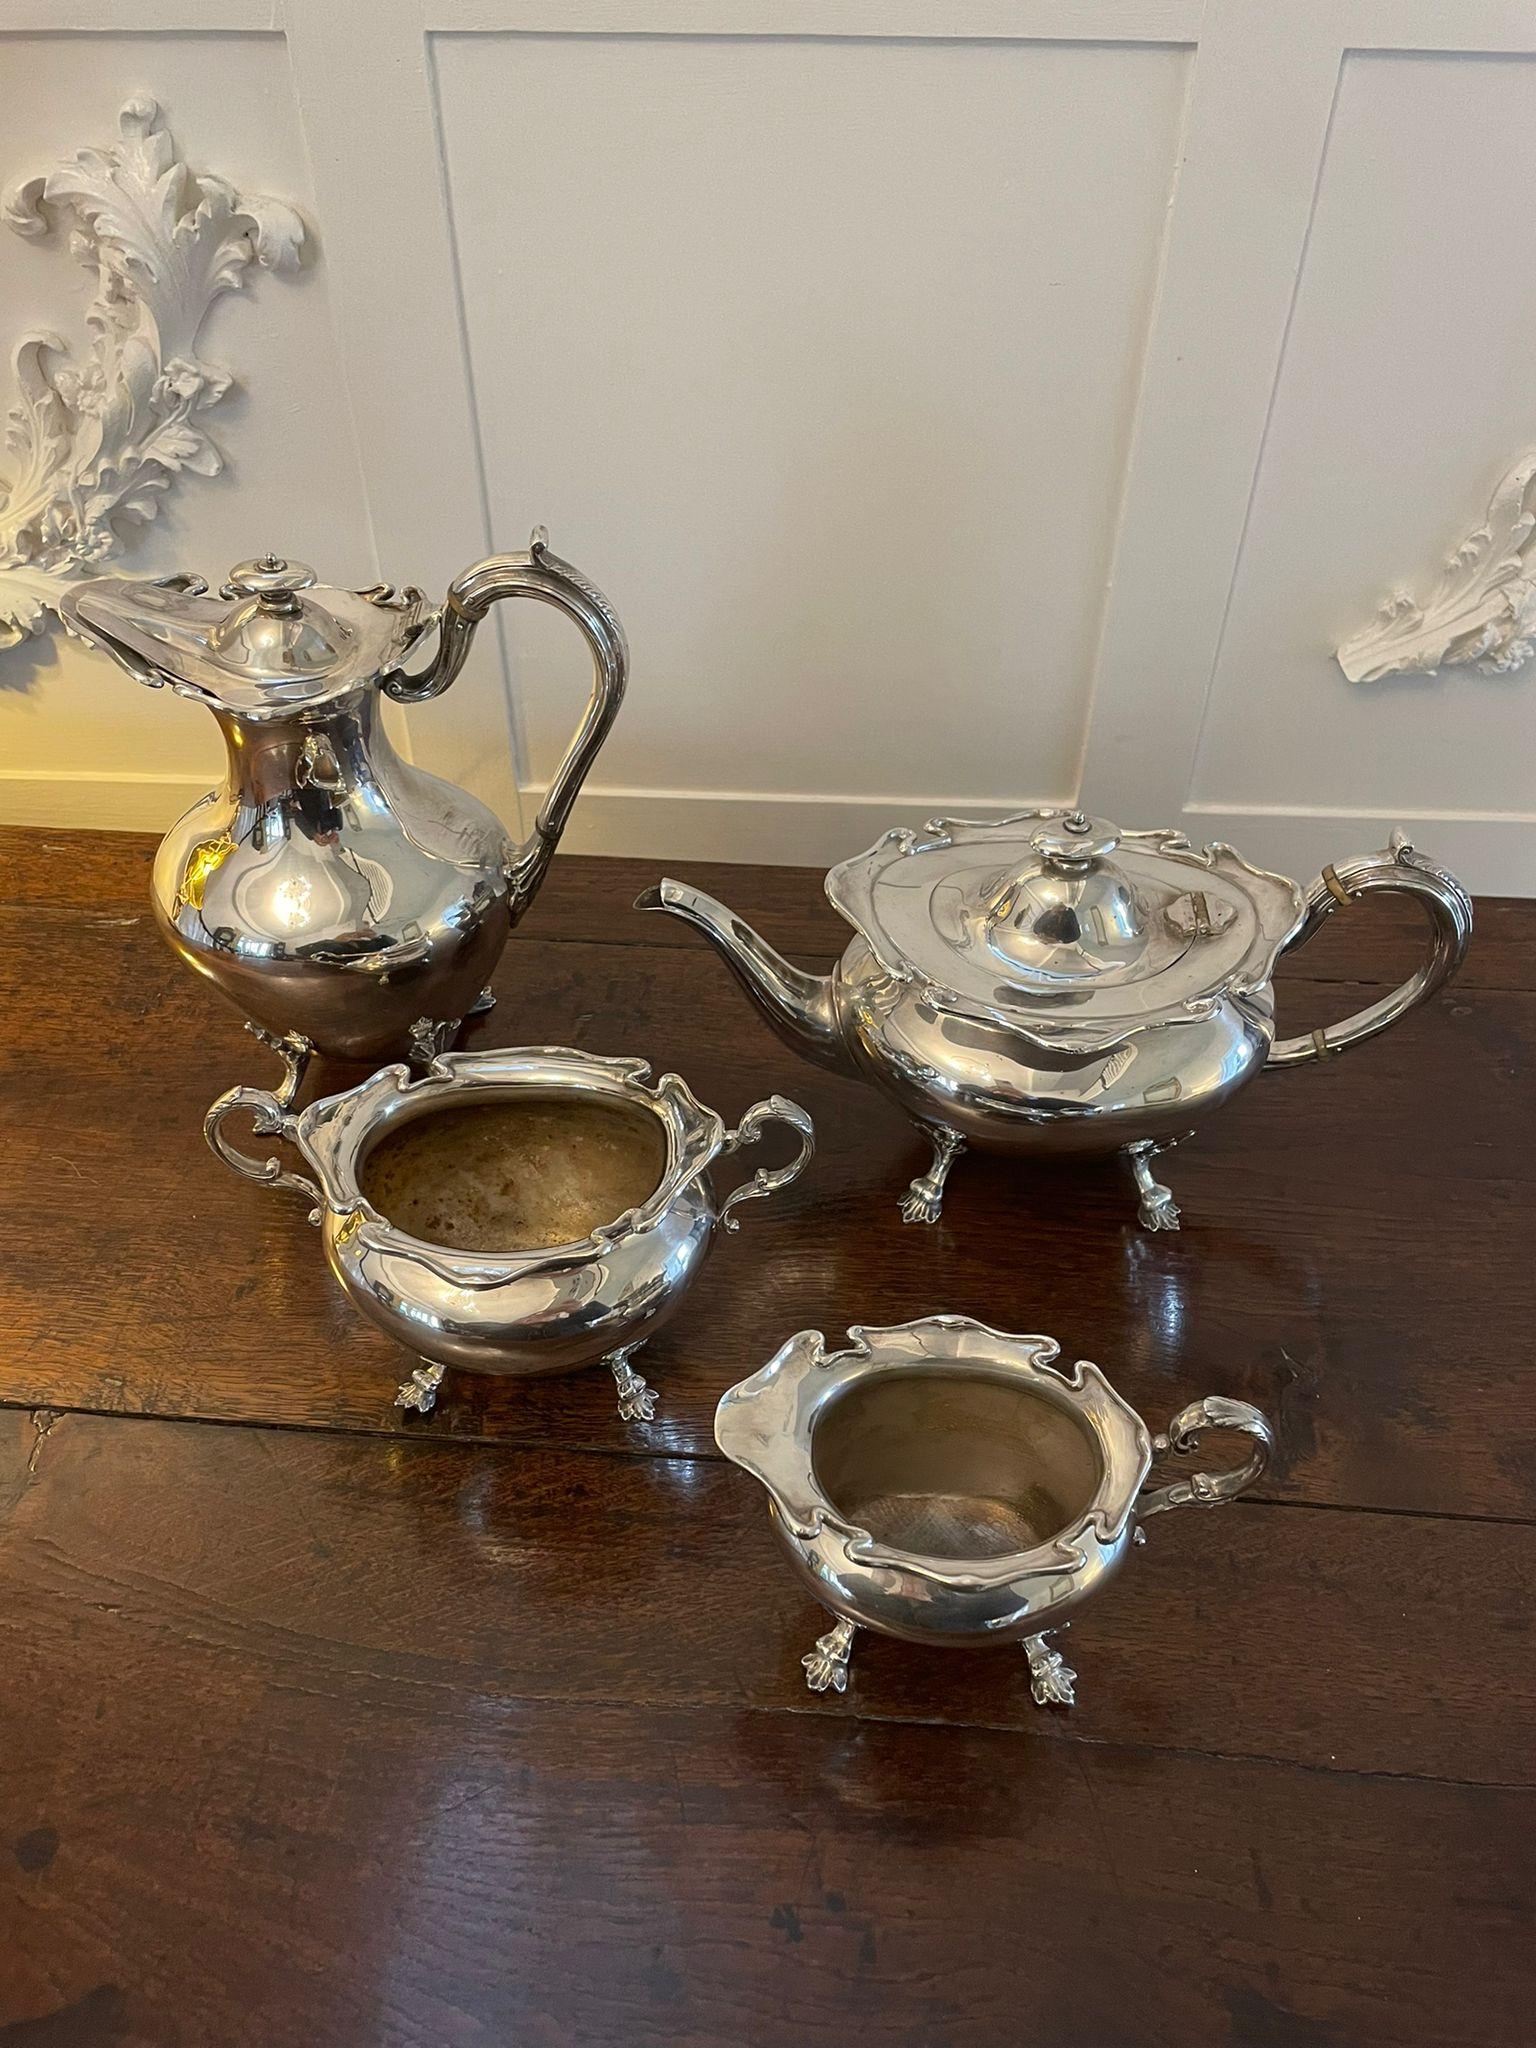 Quality antique Edwardian silver plated 4 piece tea set consisting of a teapot, sugar bowl, milk jug and coffee pot. 

A very attractive example in lovely original condition.

Coffee Pot H 23x W18 x D 12cm
Sugar Bowl H 10 x W 16 x D 8cm
Date